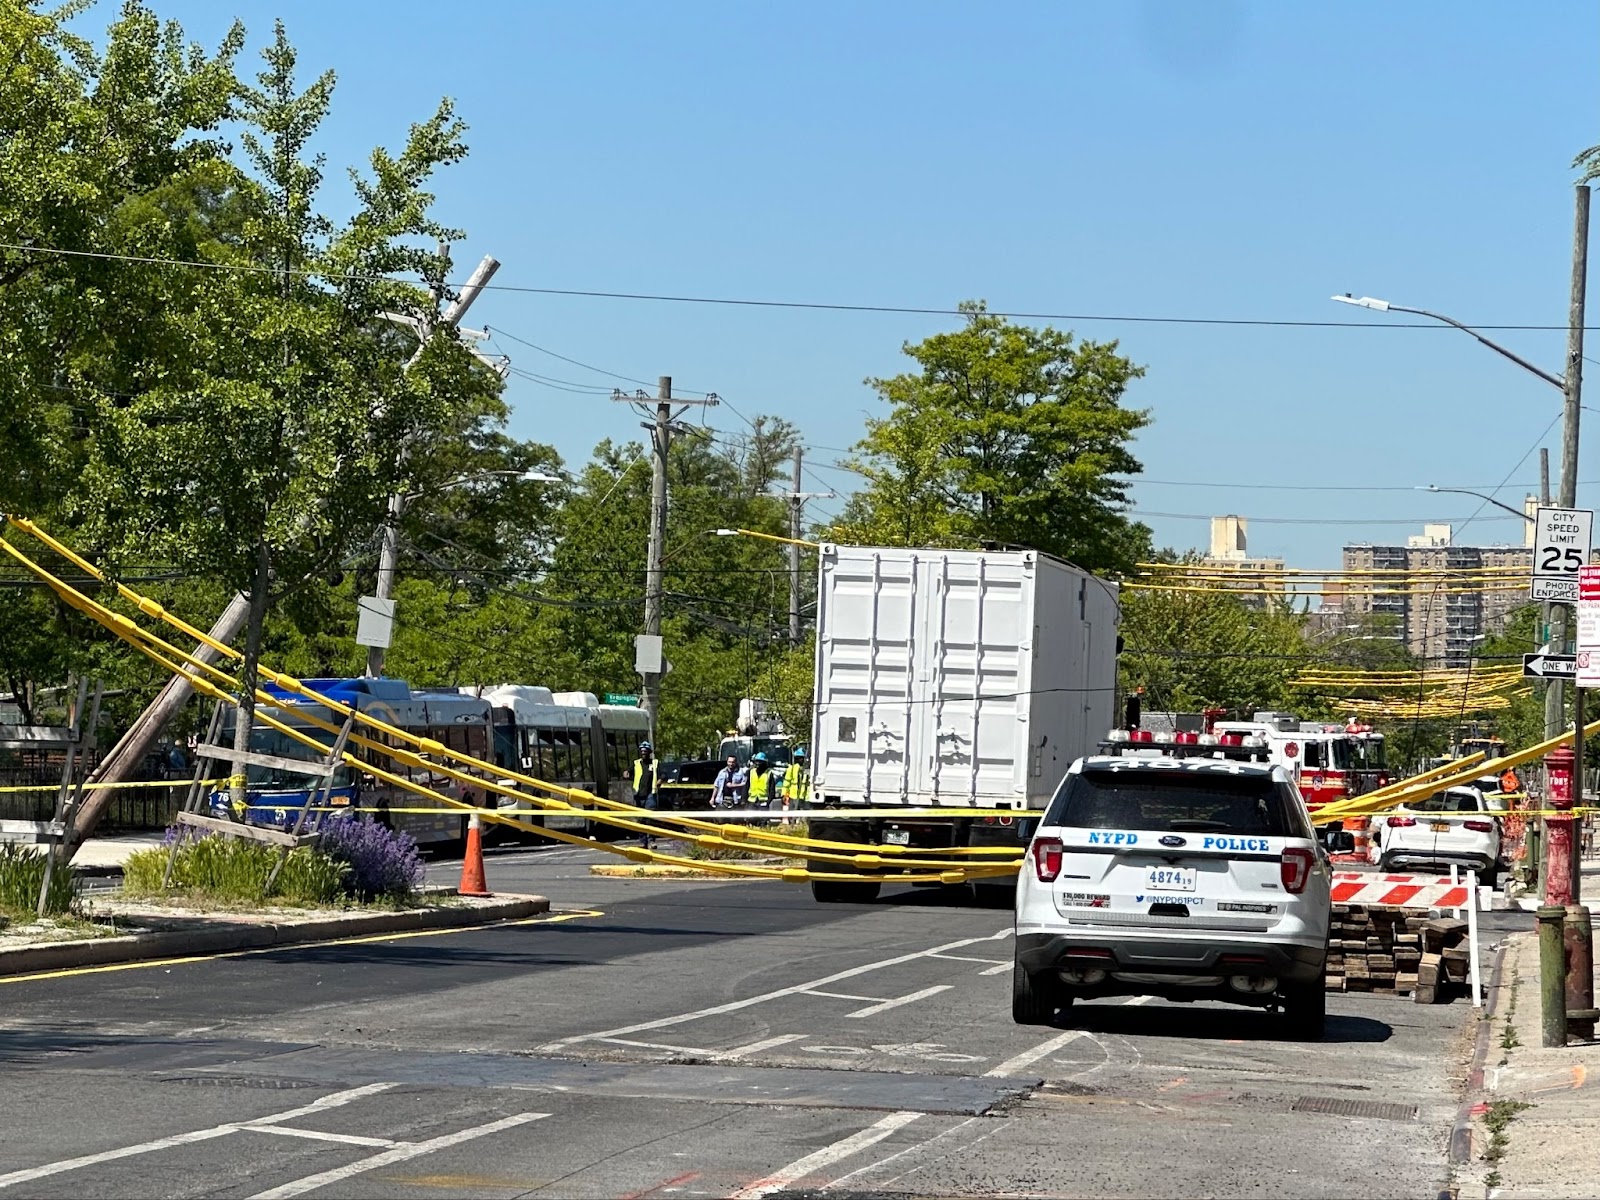 SEMI-TRUCK TOPPLES POWER LINES AND UTILITY POLE ATOP A B49 BUS; DRIVER INJURED